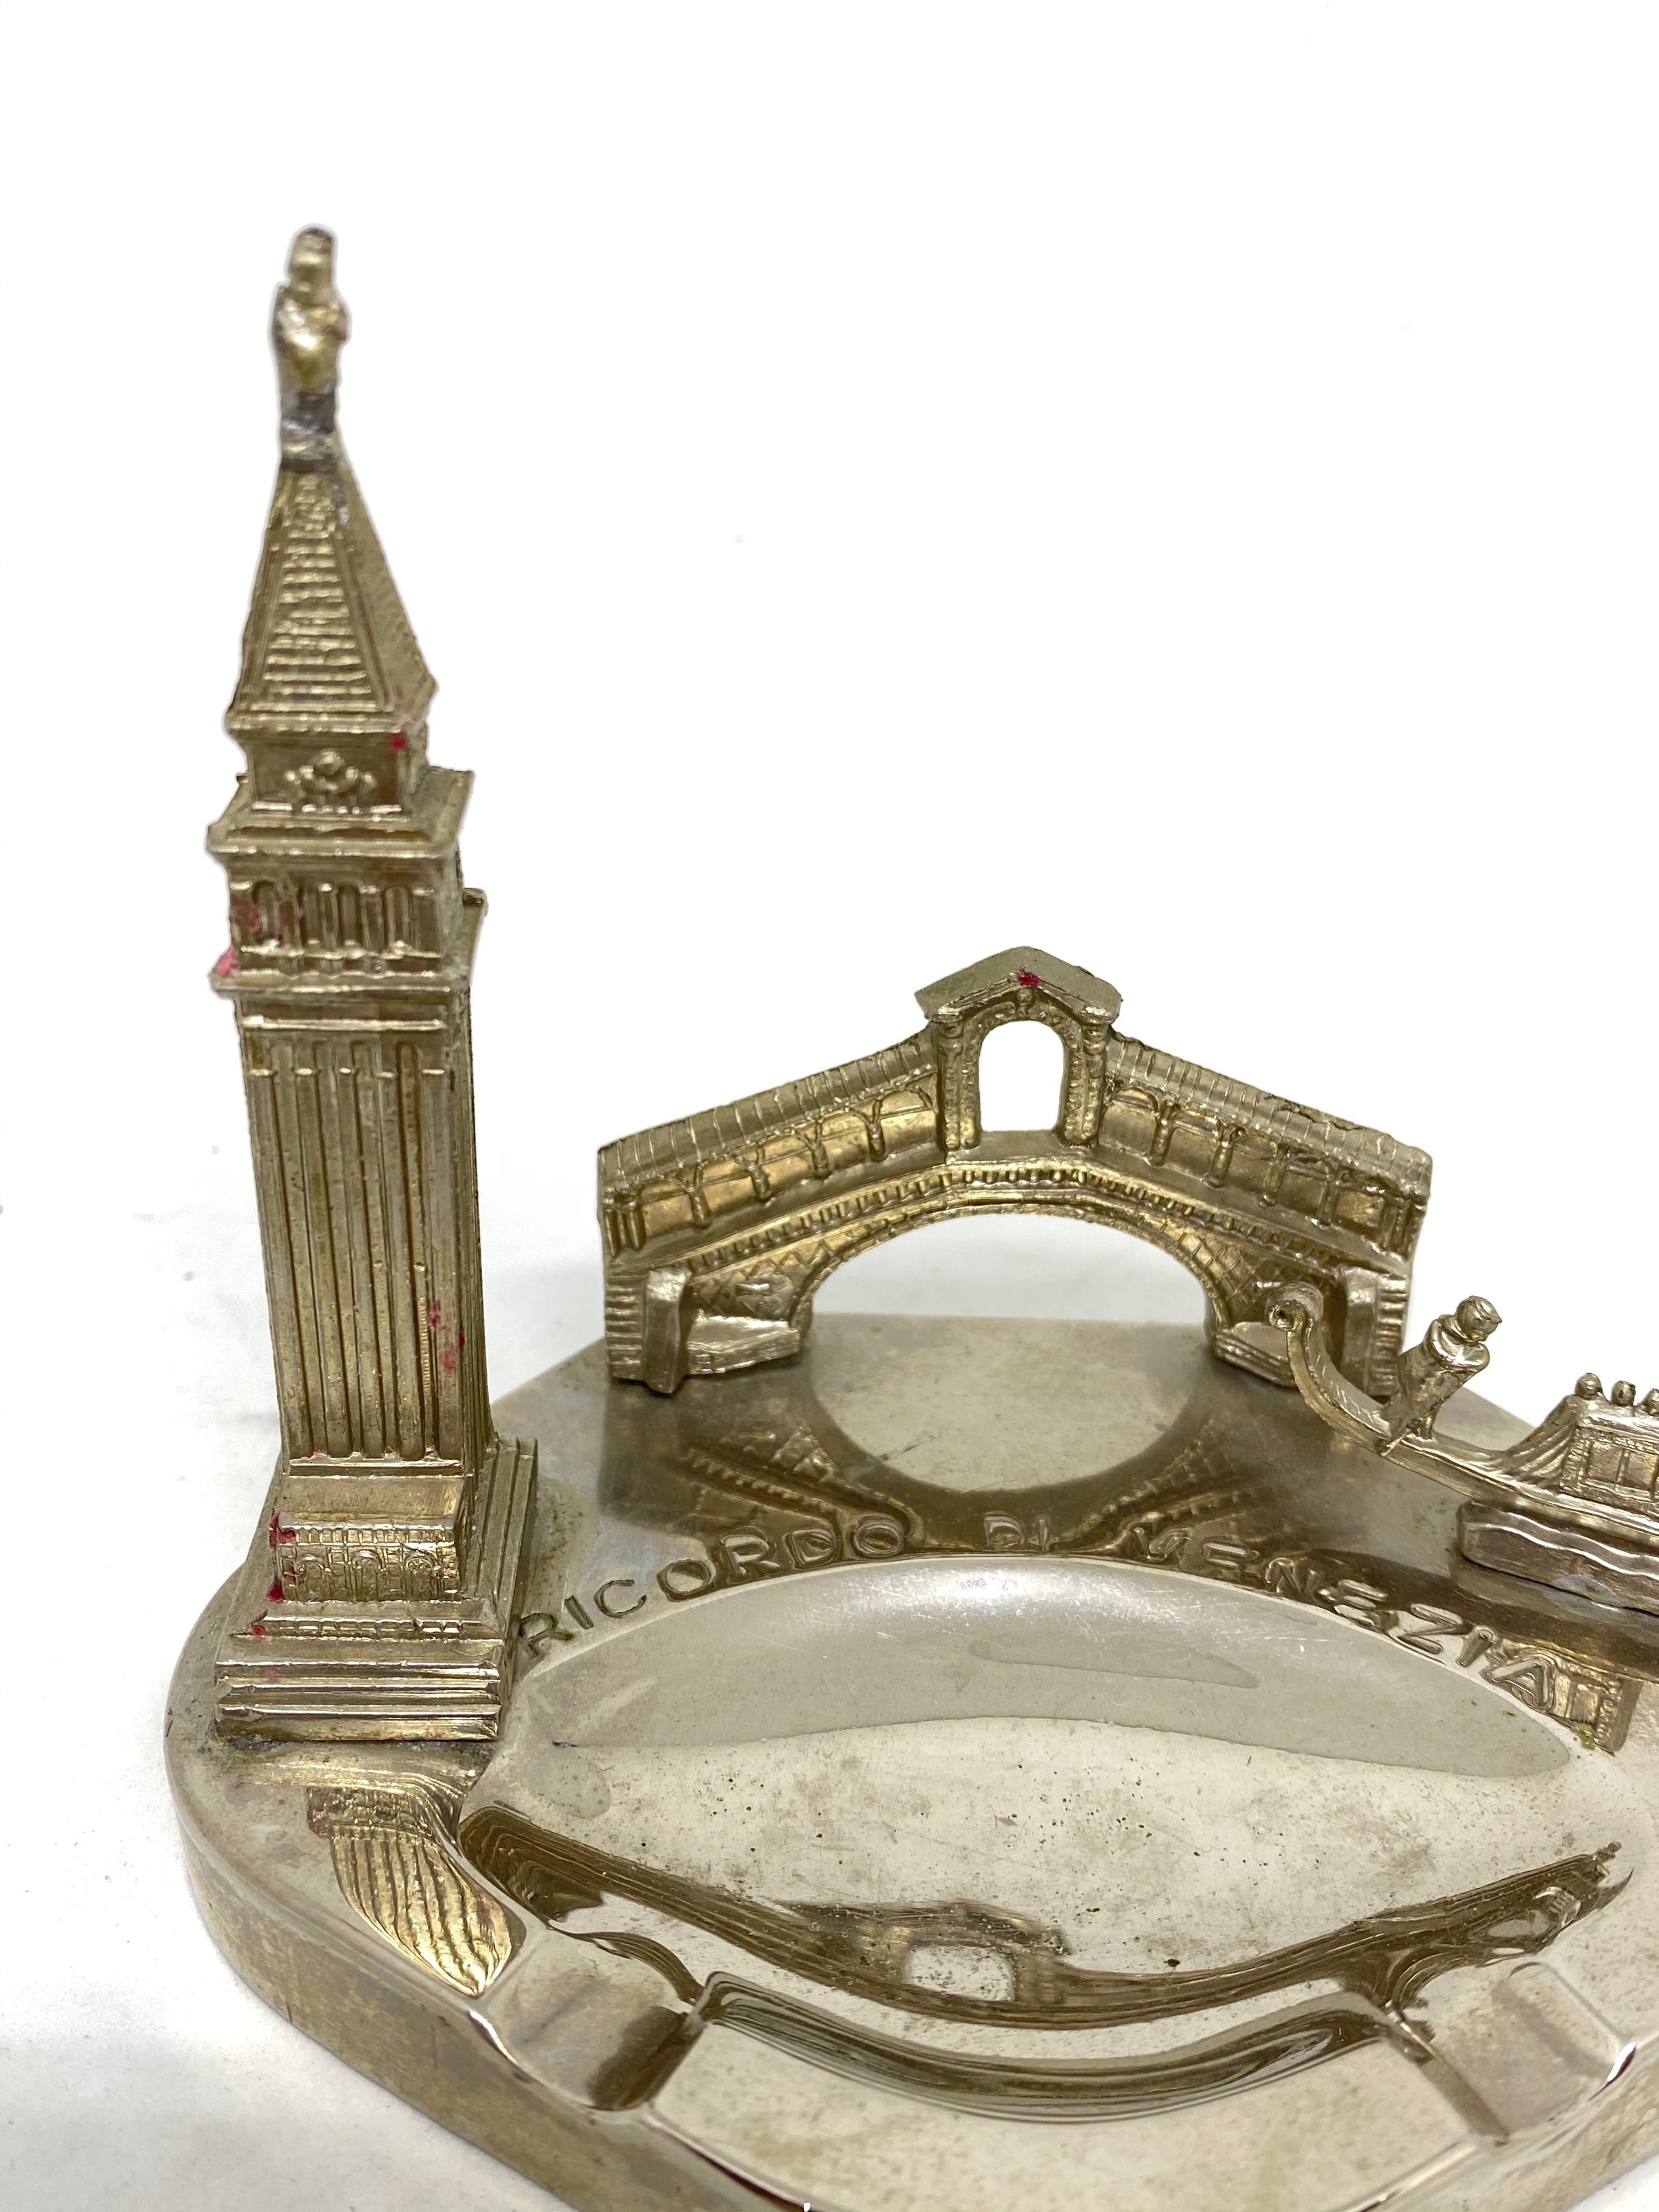 A 1950s souvenir building architectural model ashtray. Some wear with a nice patina, but this is old-age. Made of metal. A beautiful nice item to use or just a display item in your collections of souvenirs from around the world.

 